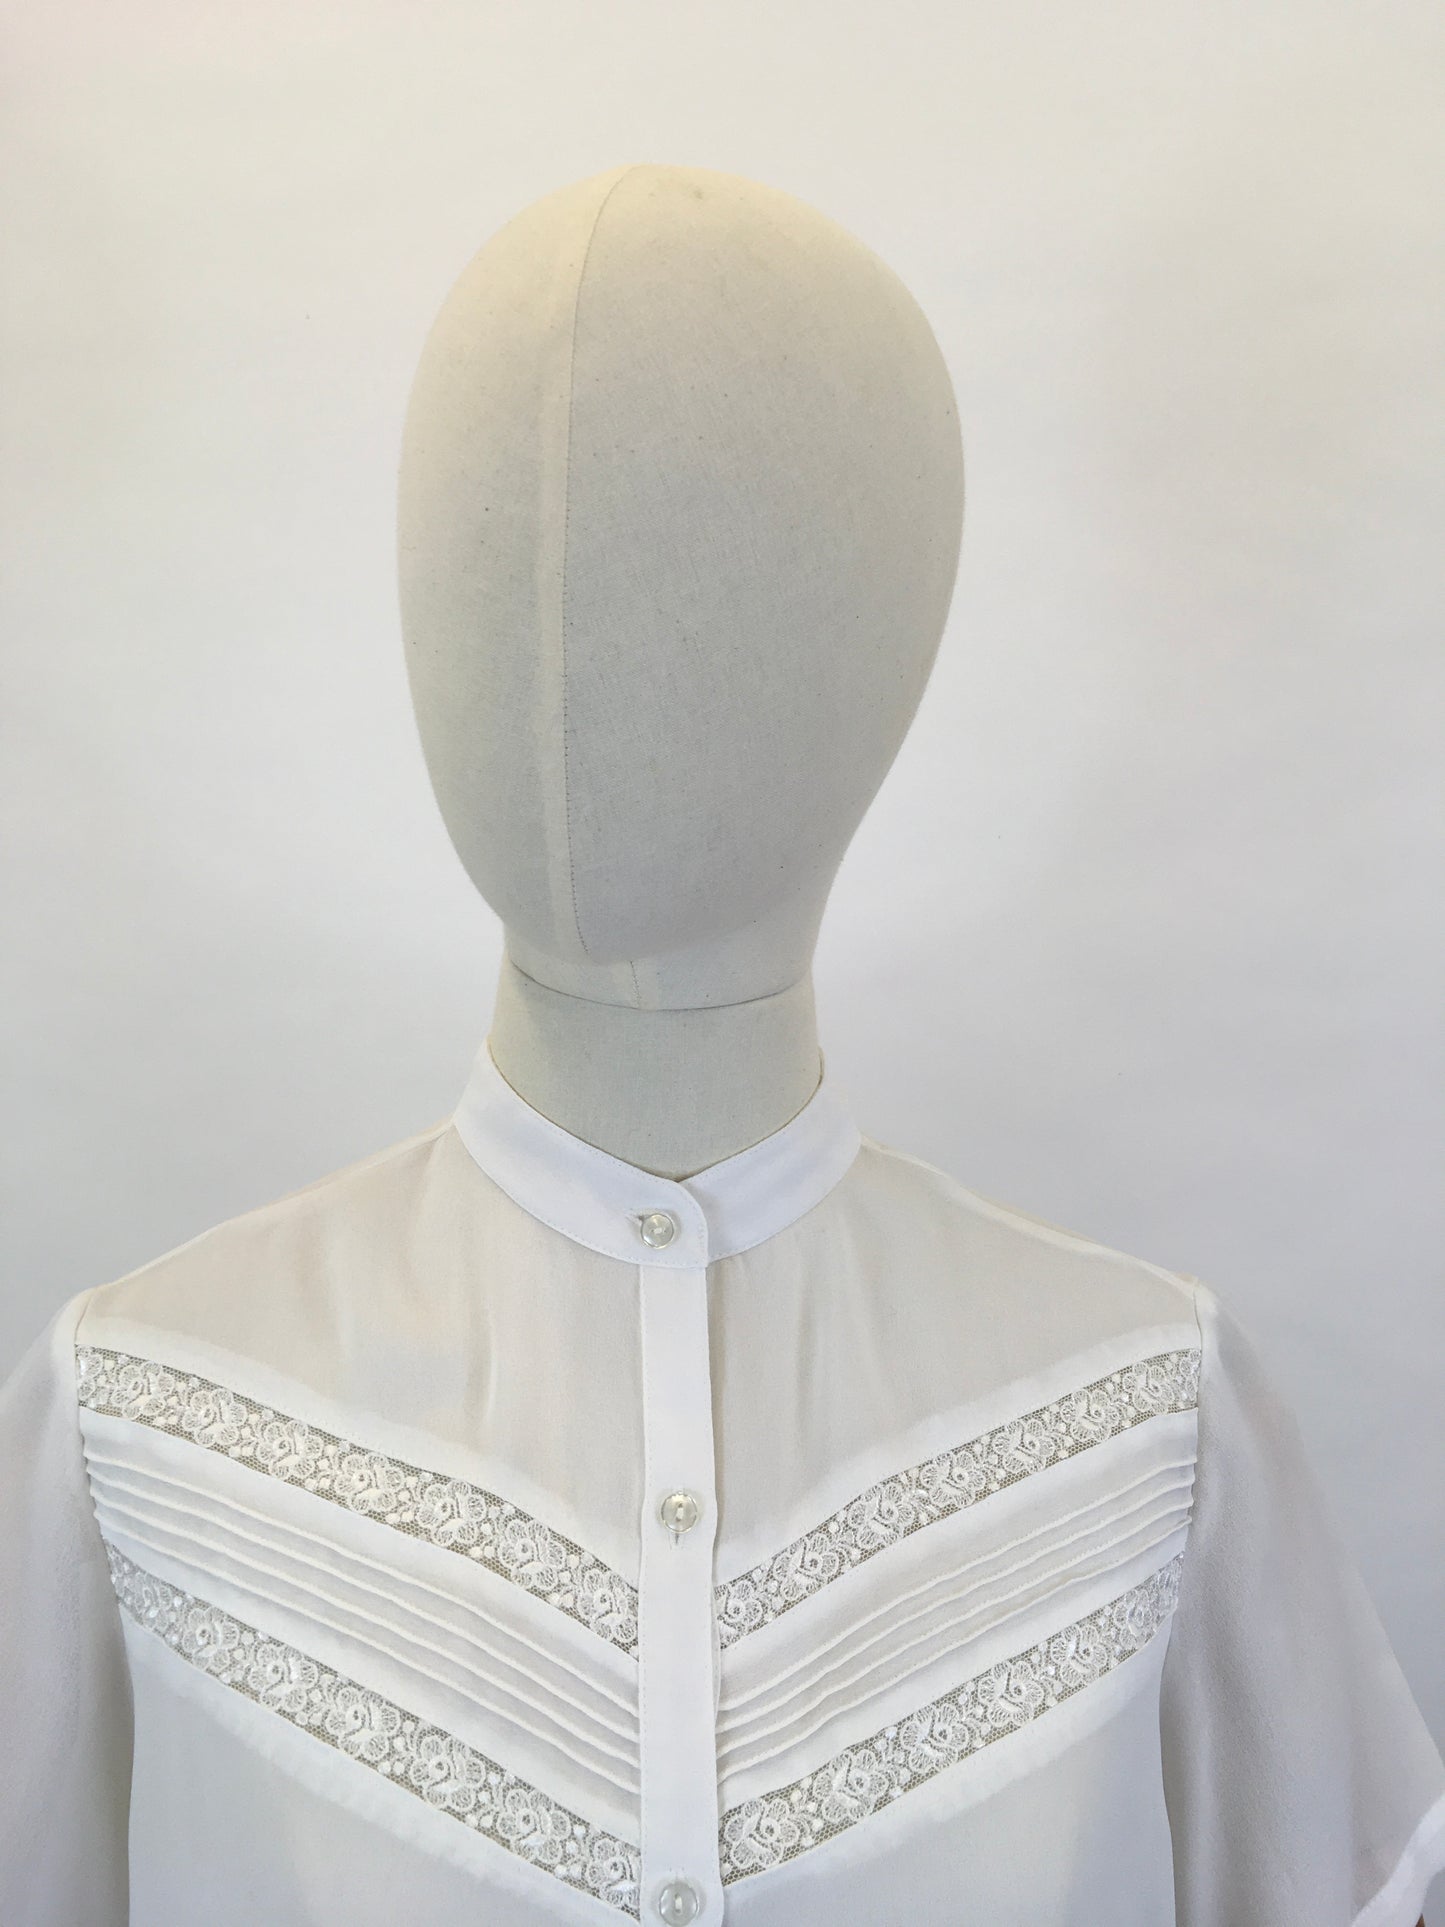 Original 1950’s Darling Sheer Rayon Blouse in White - Pintuck and Lace Detailing